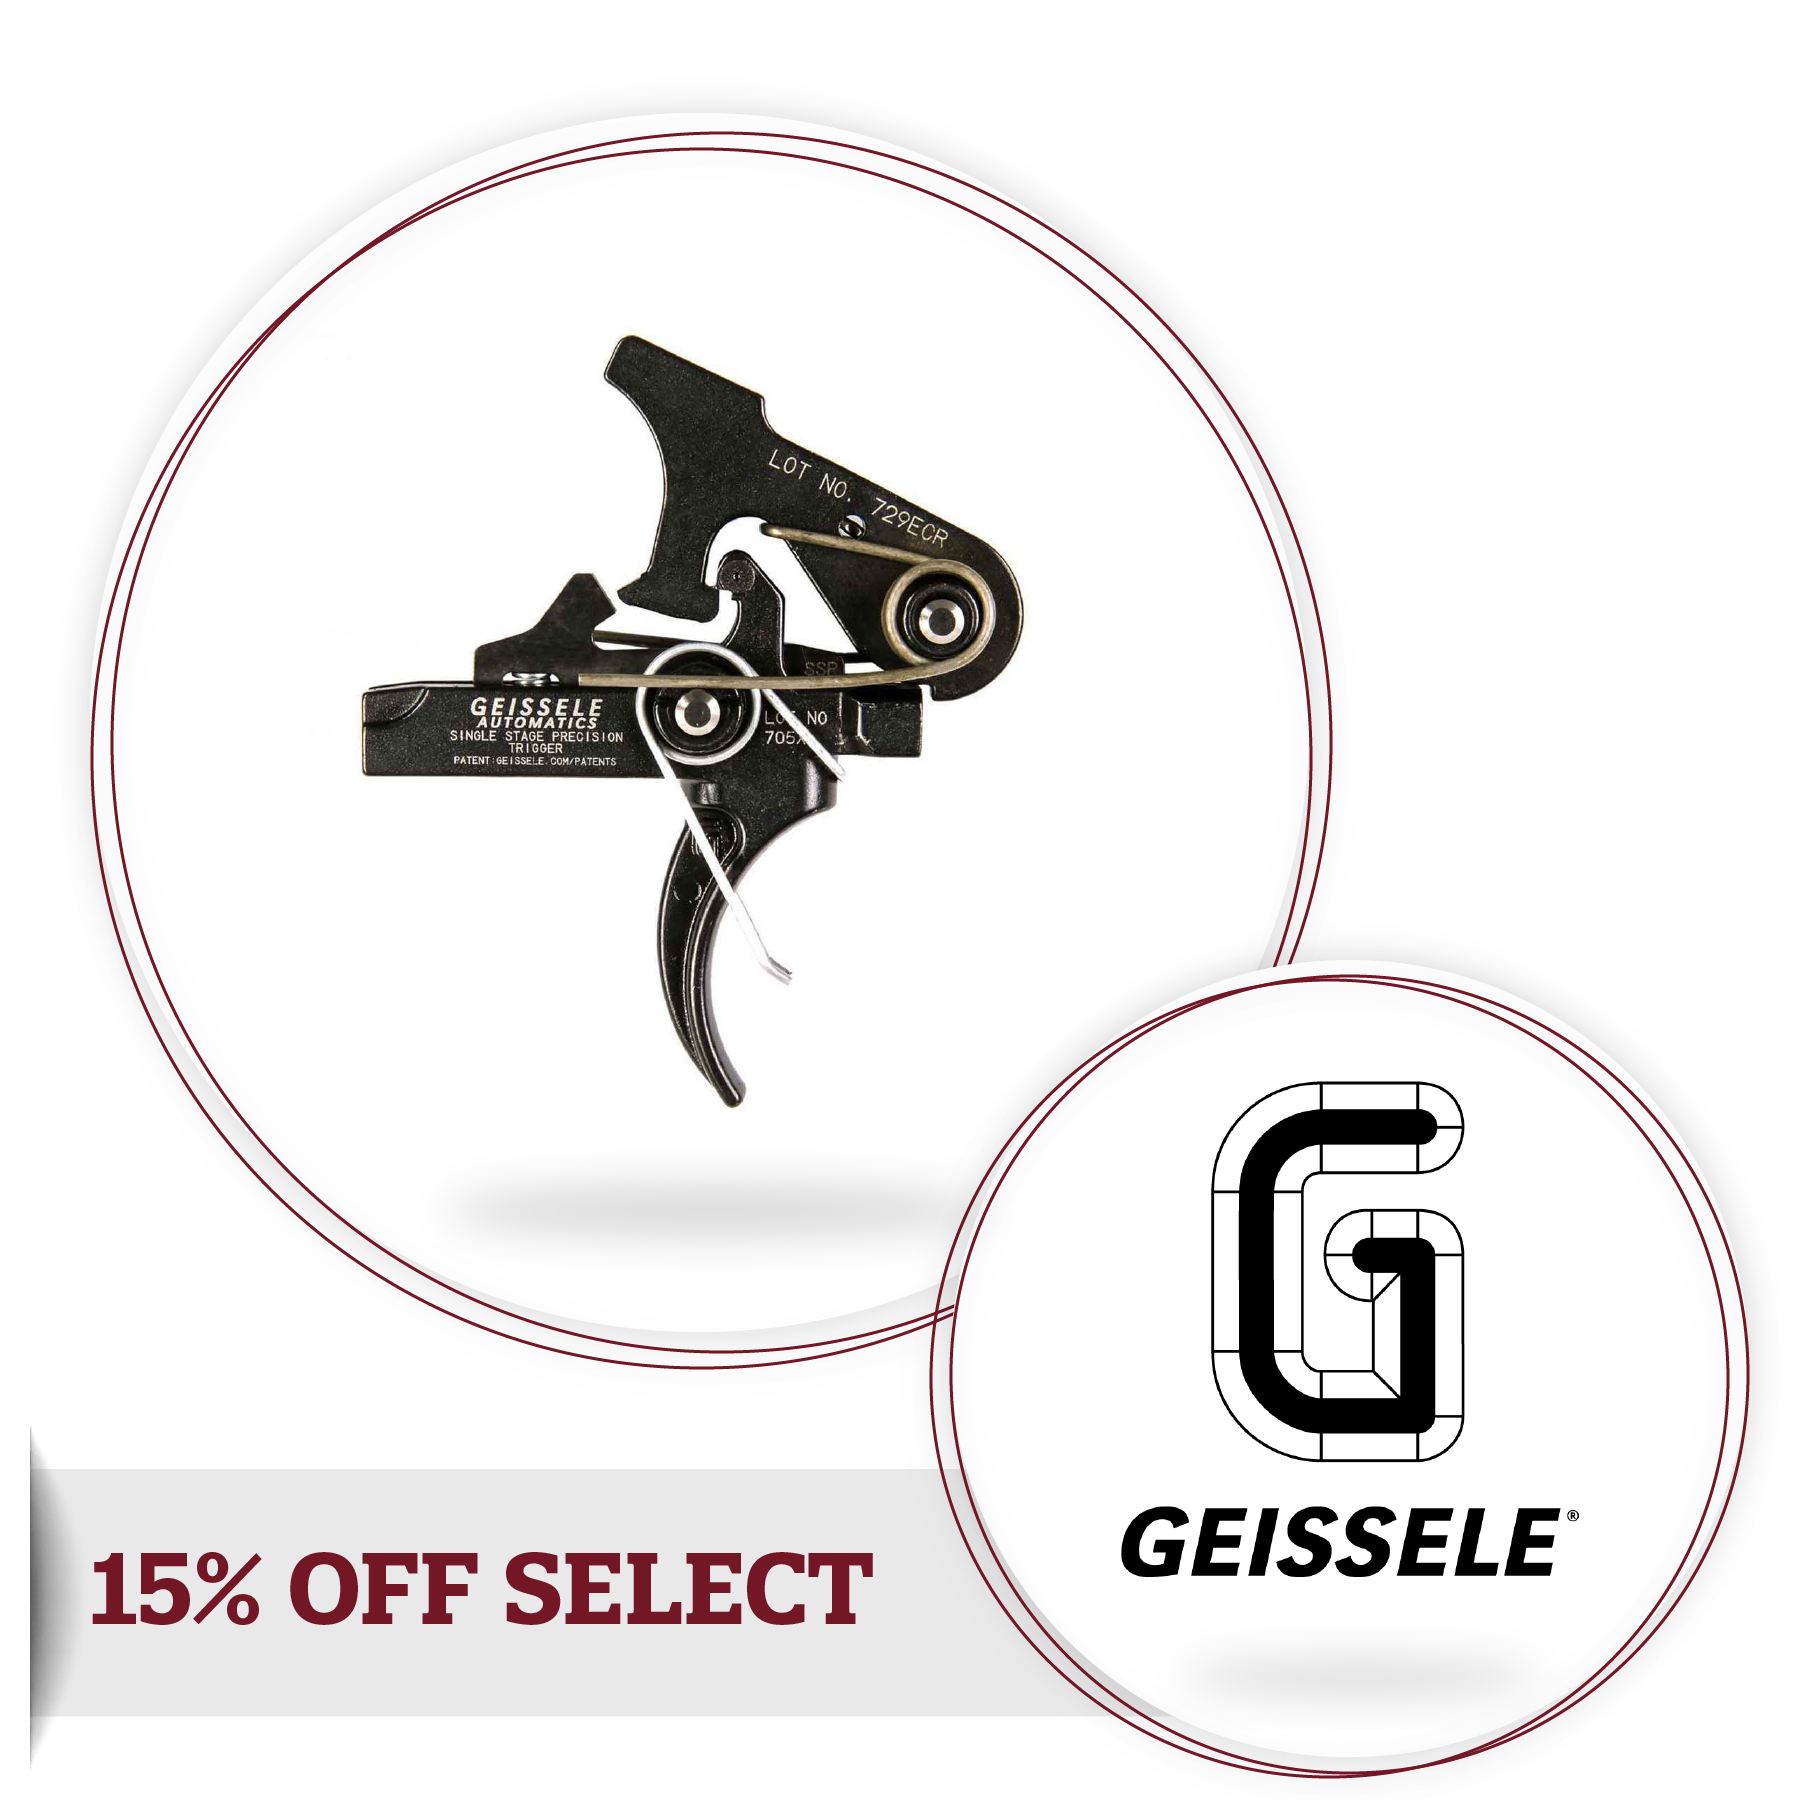 Save 15% On Select Geissele Parts